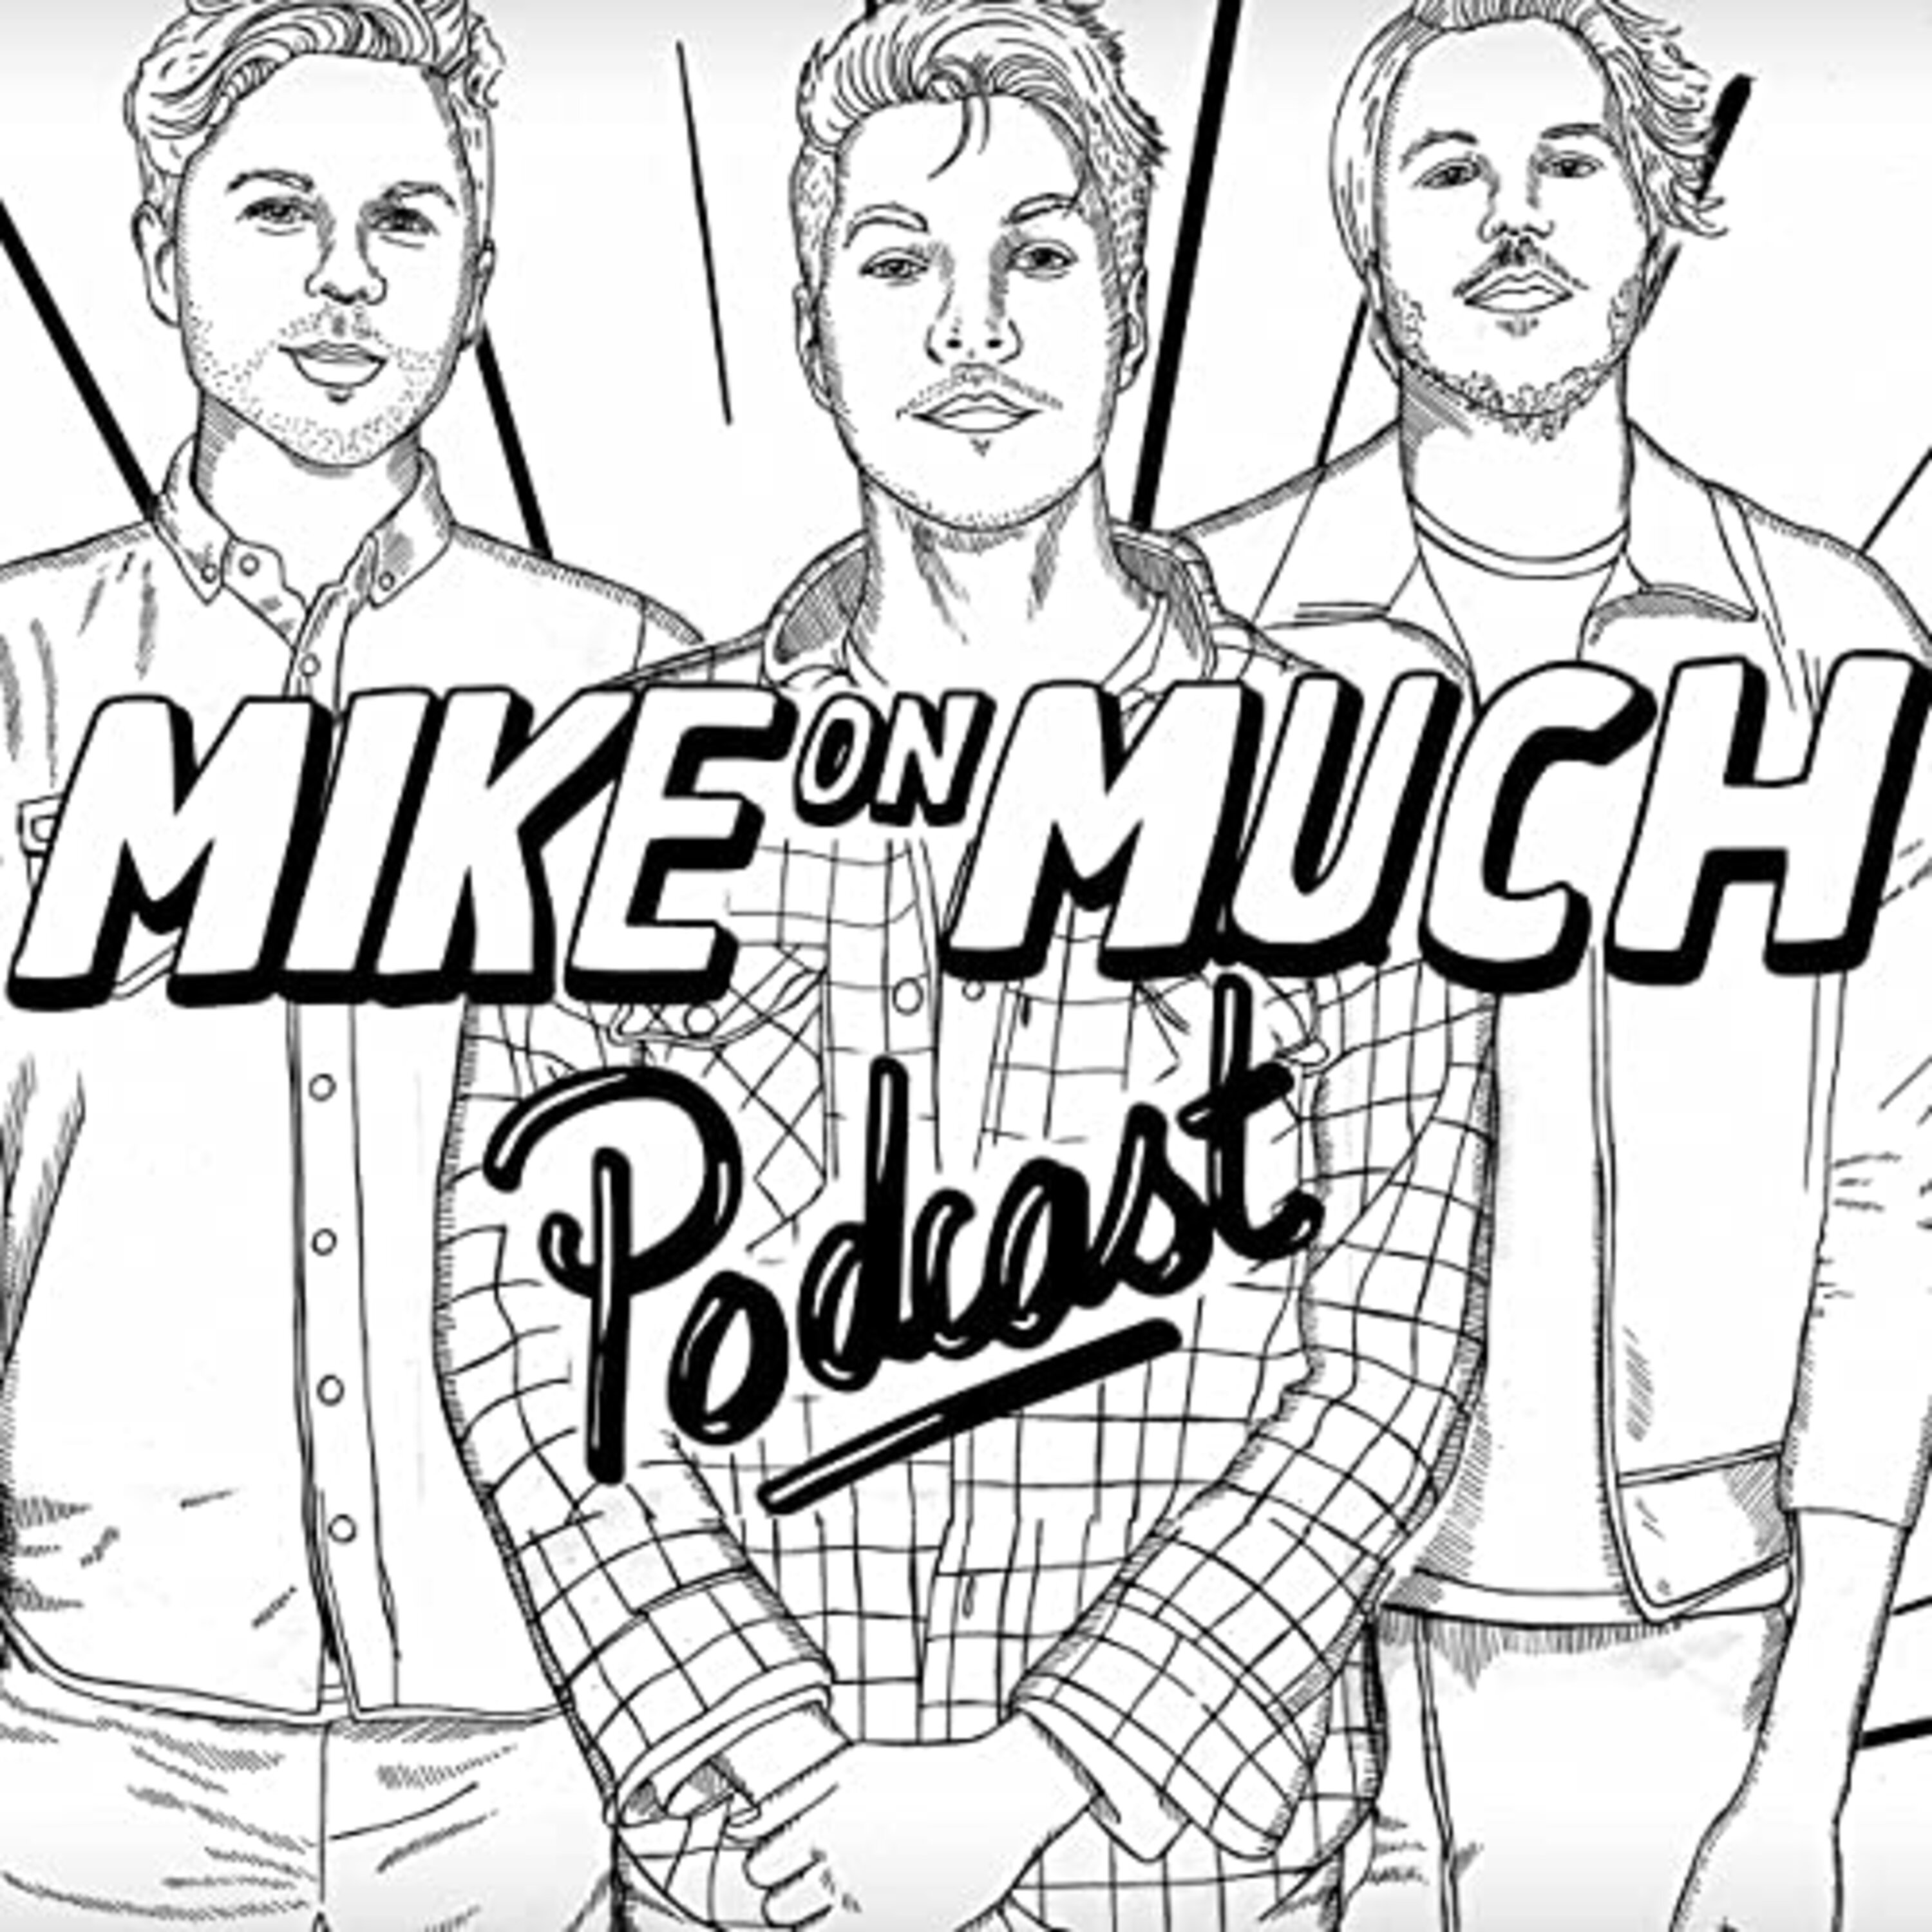 Season 1 Mike On Much: ”This Is The Last Time I Get To Party - Leave Me Alone”